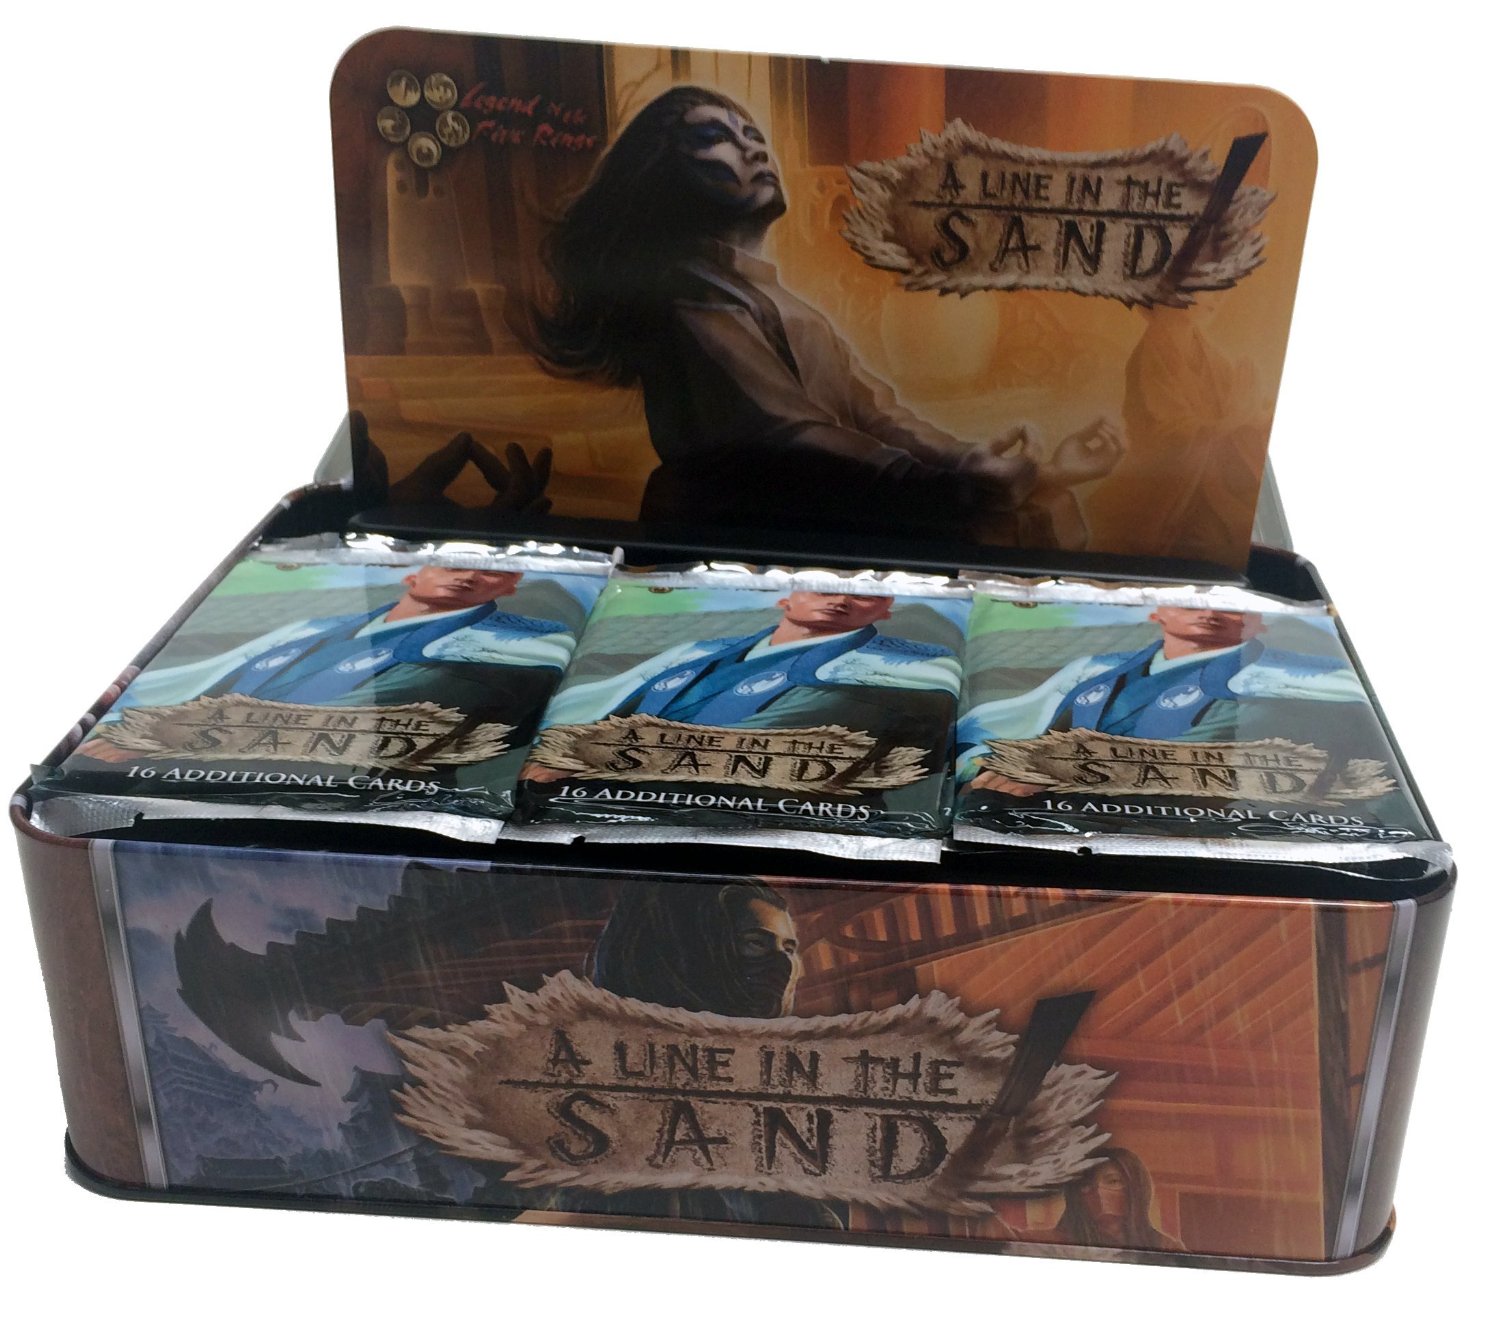 L5R A Line in the Sand Booster Box